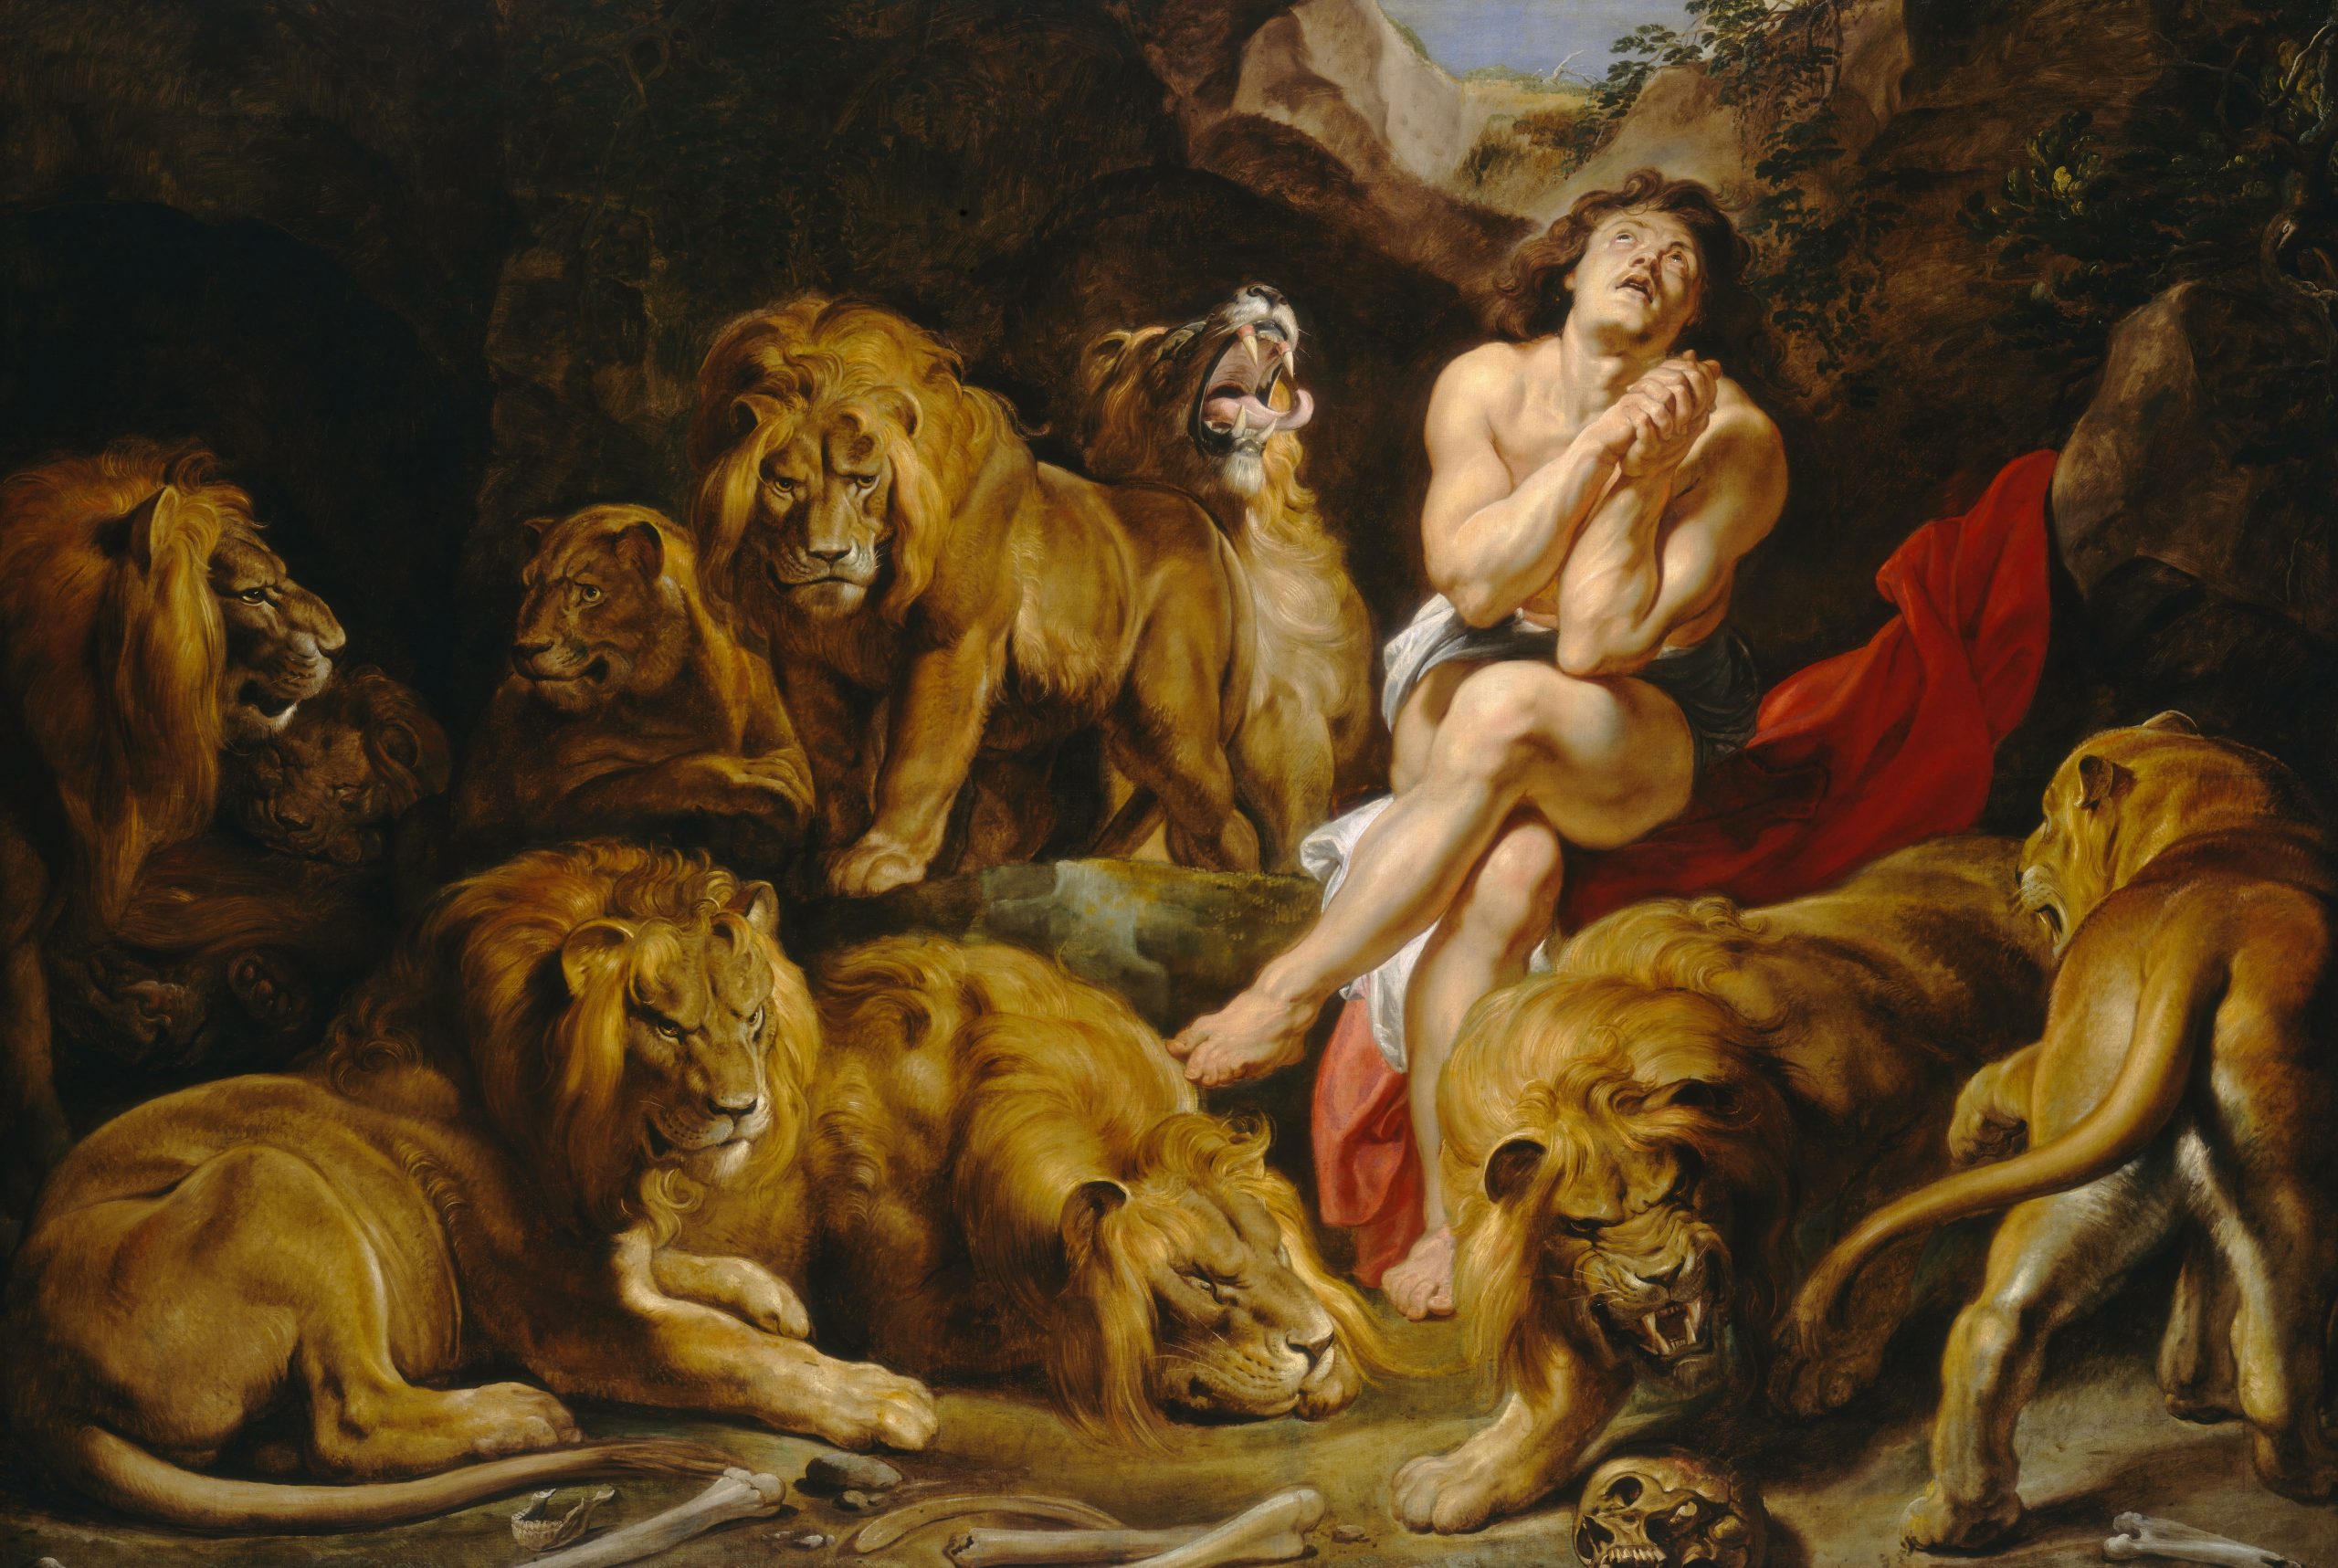 Man surrounded by lion and lioness painting wallpaper, animals, picture